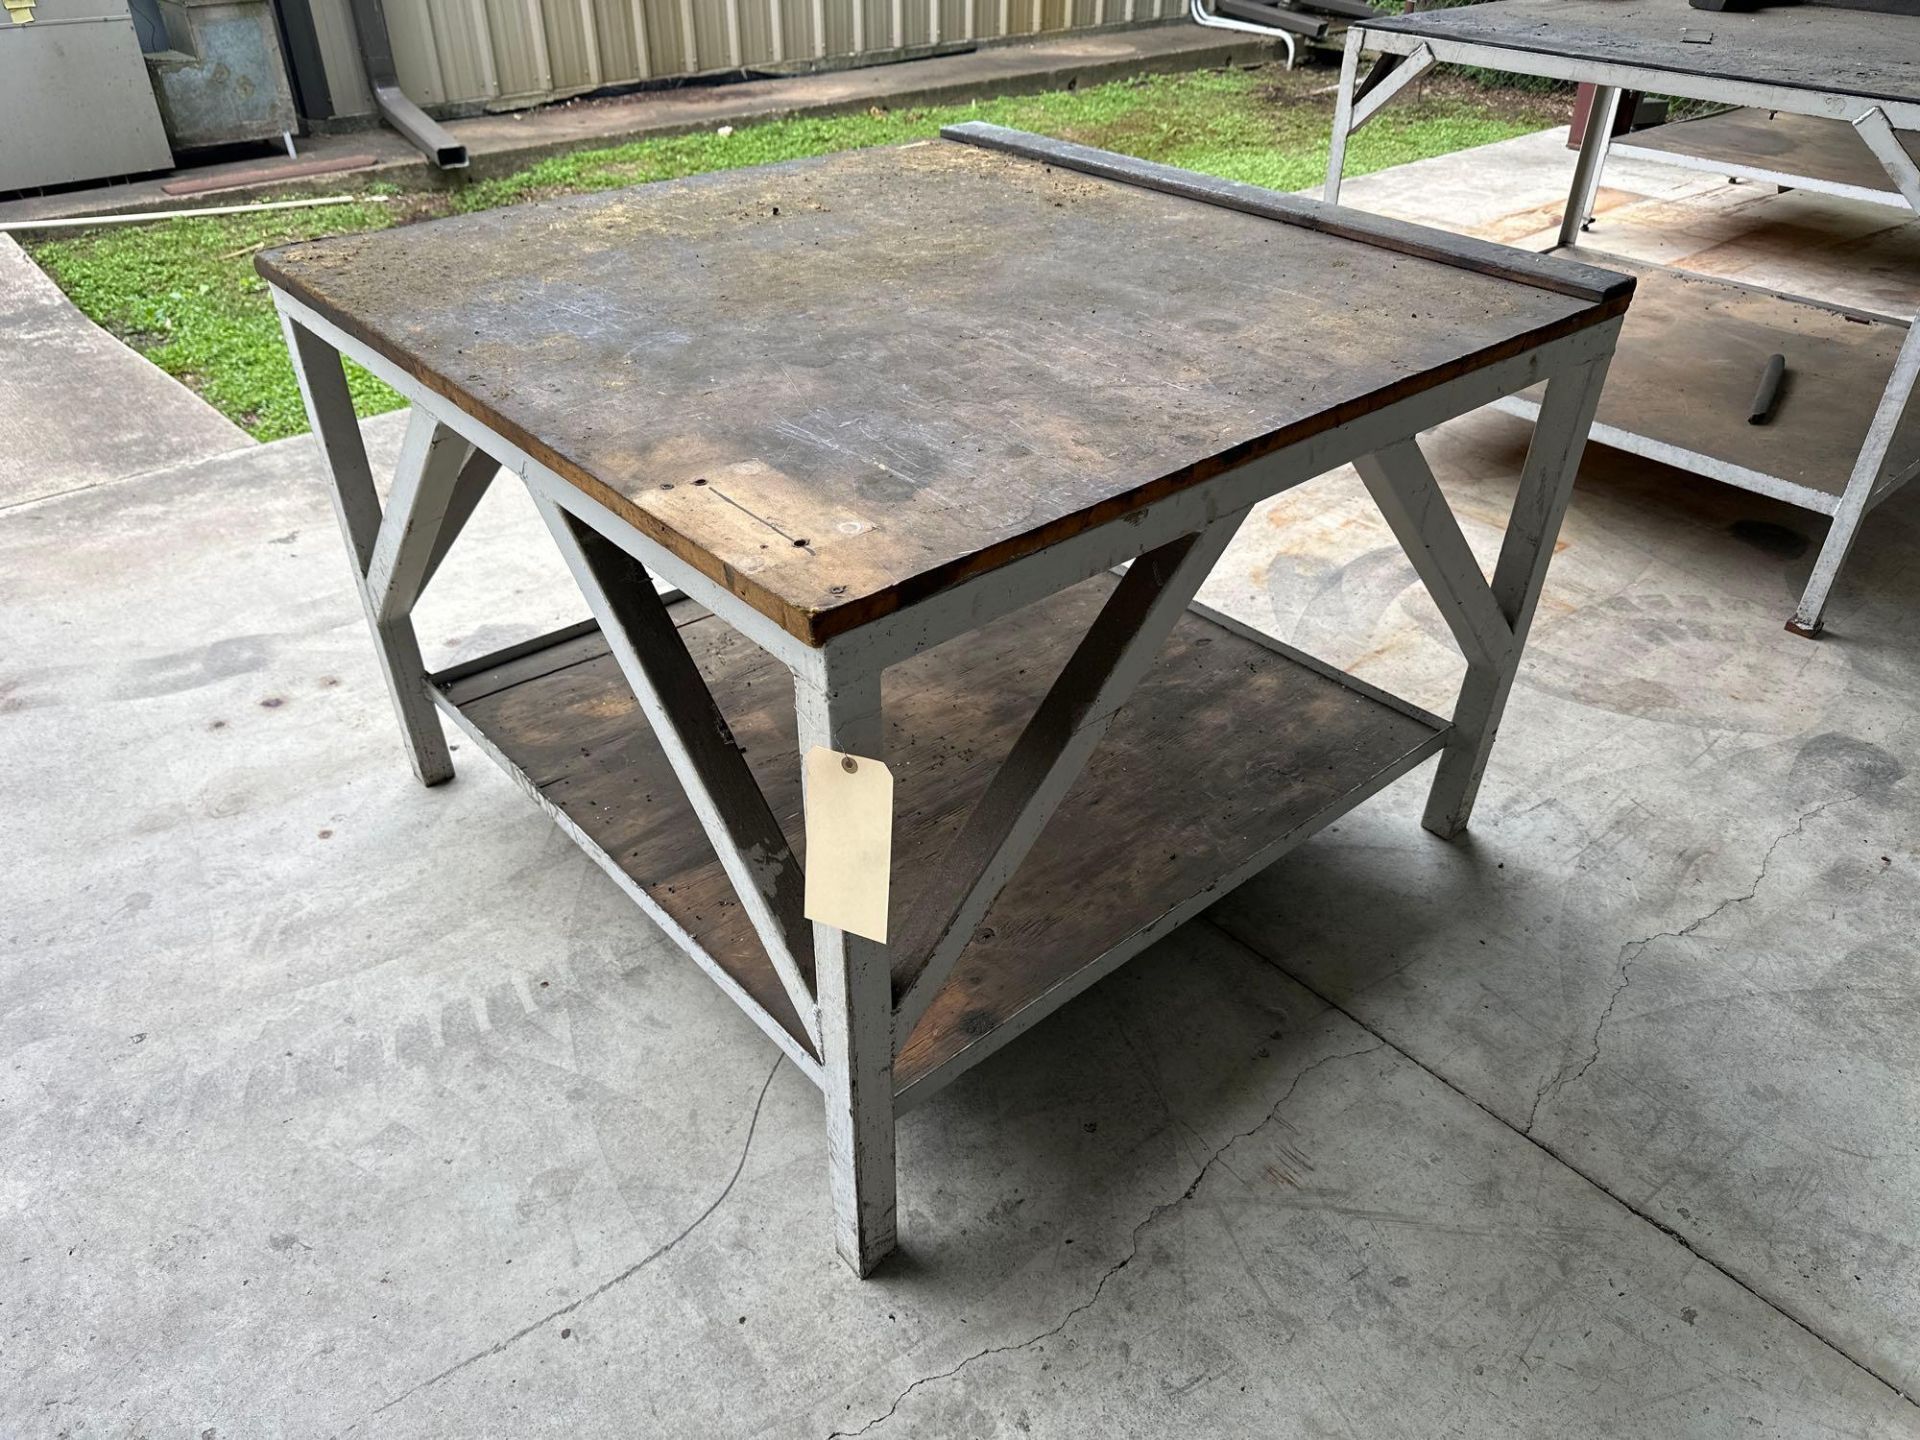 Metal Table with Wooden Top 48” X 48” X 39” - Image 2 of 3